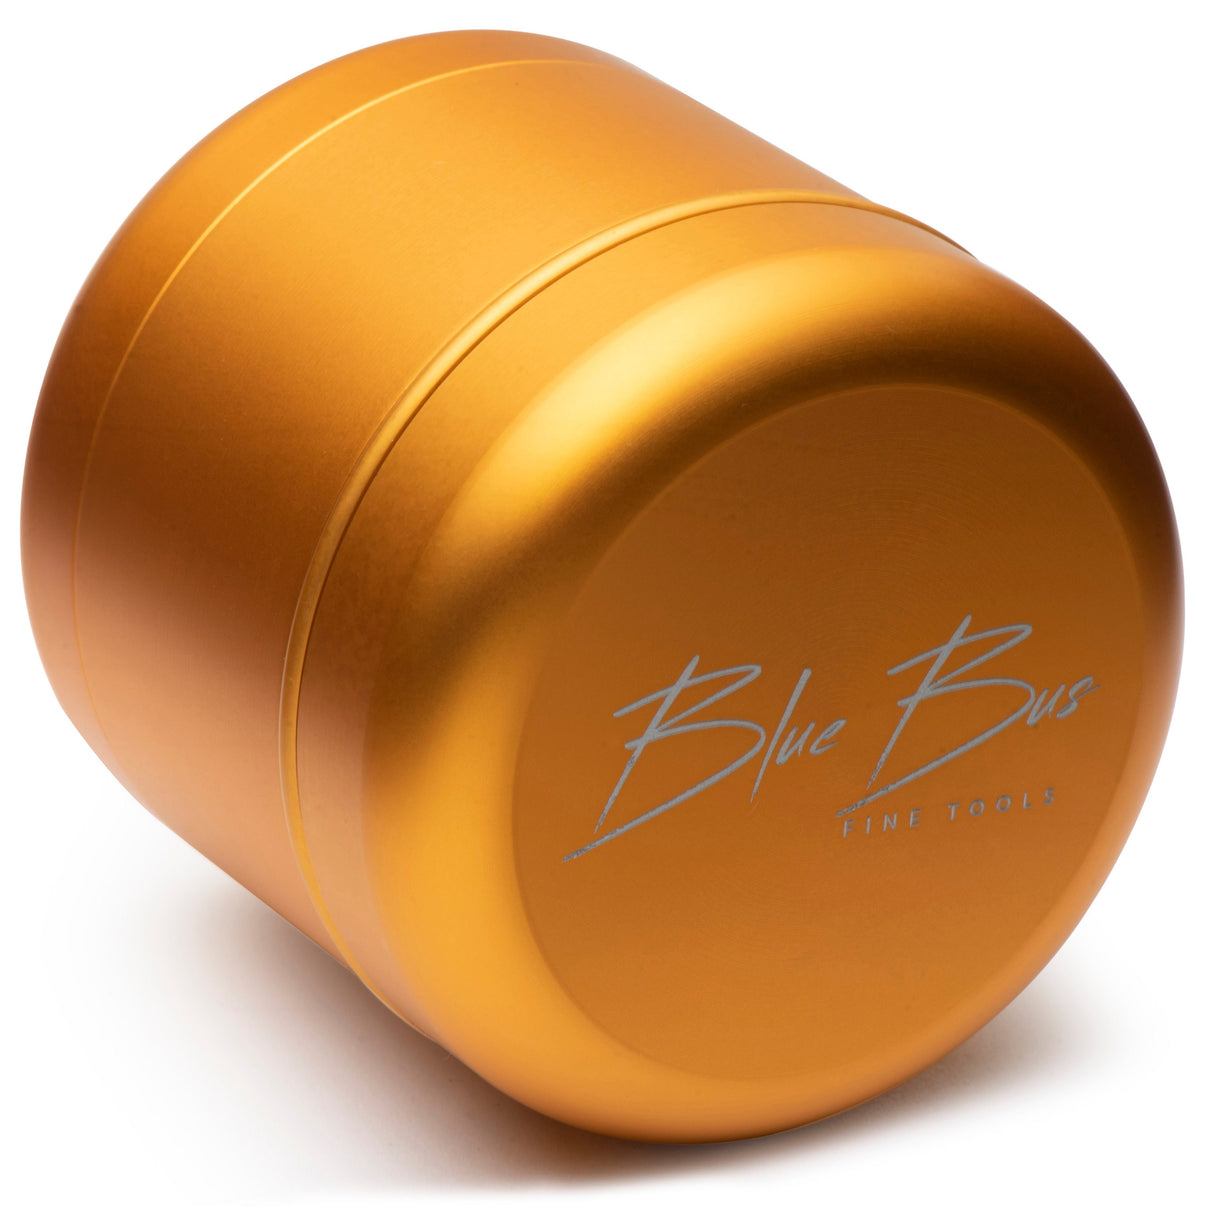 BLUEBUS 4 Piece 2.2" Aluminum Grinder in Gold - Magnetic Closure - For Dry Herbs